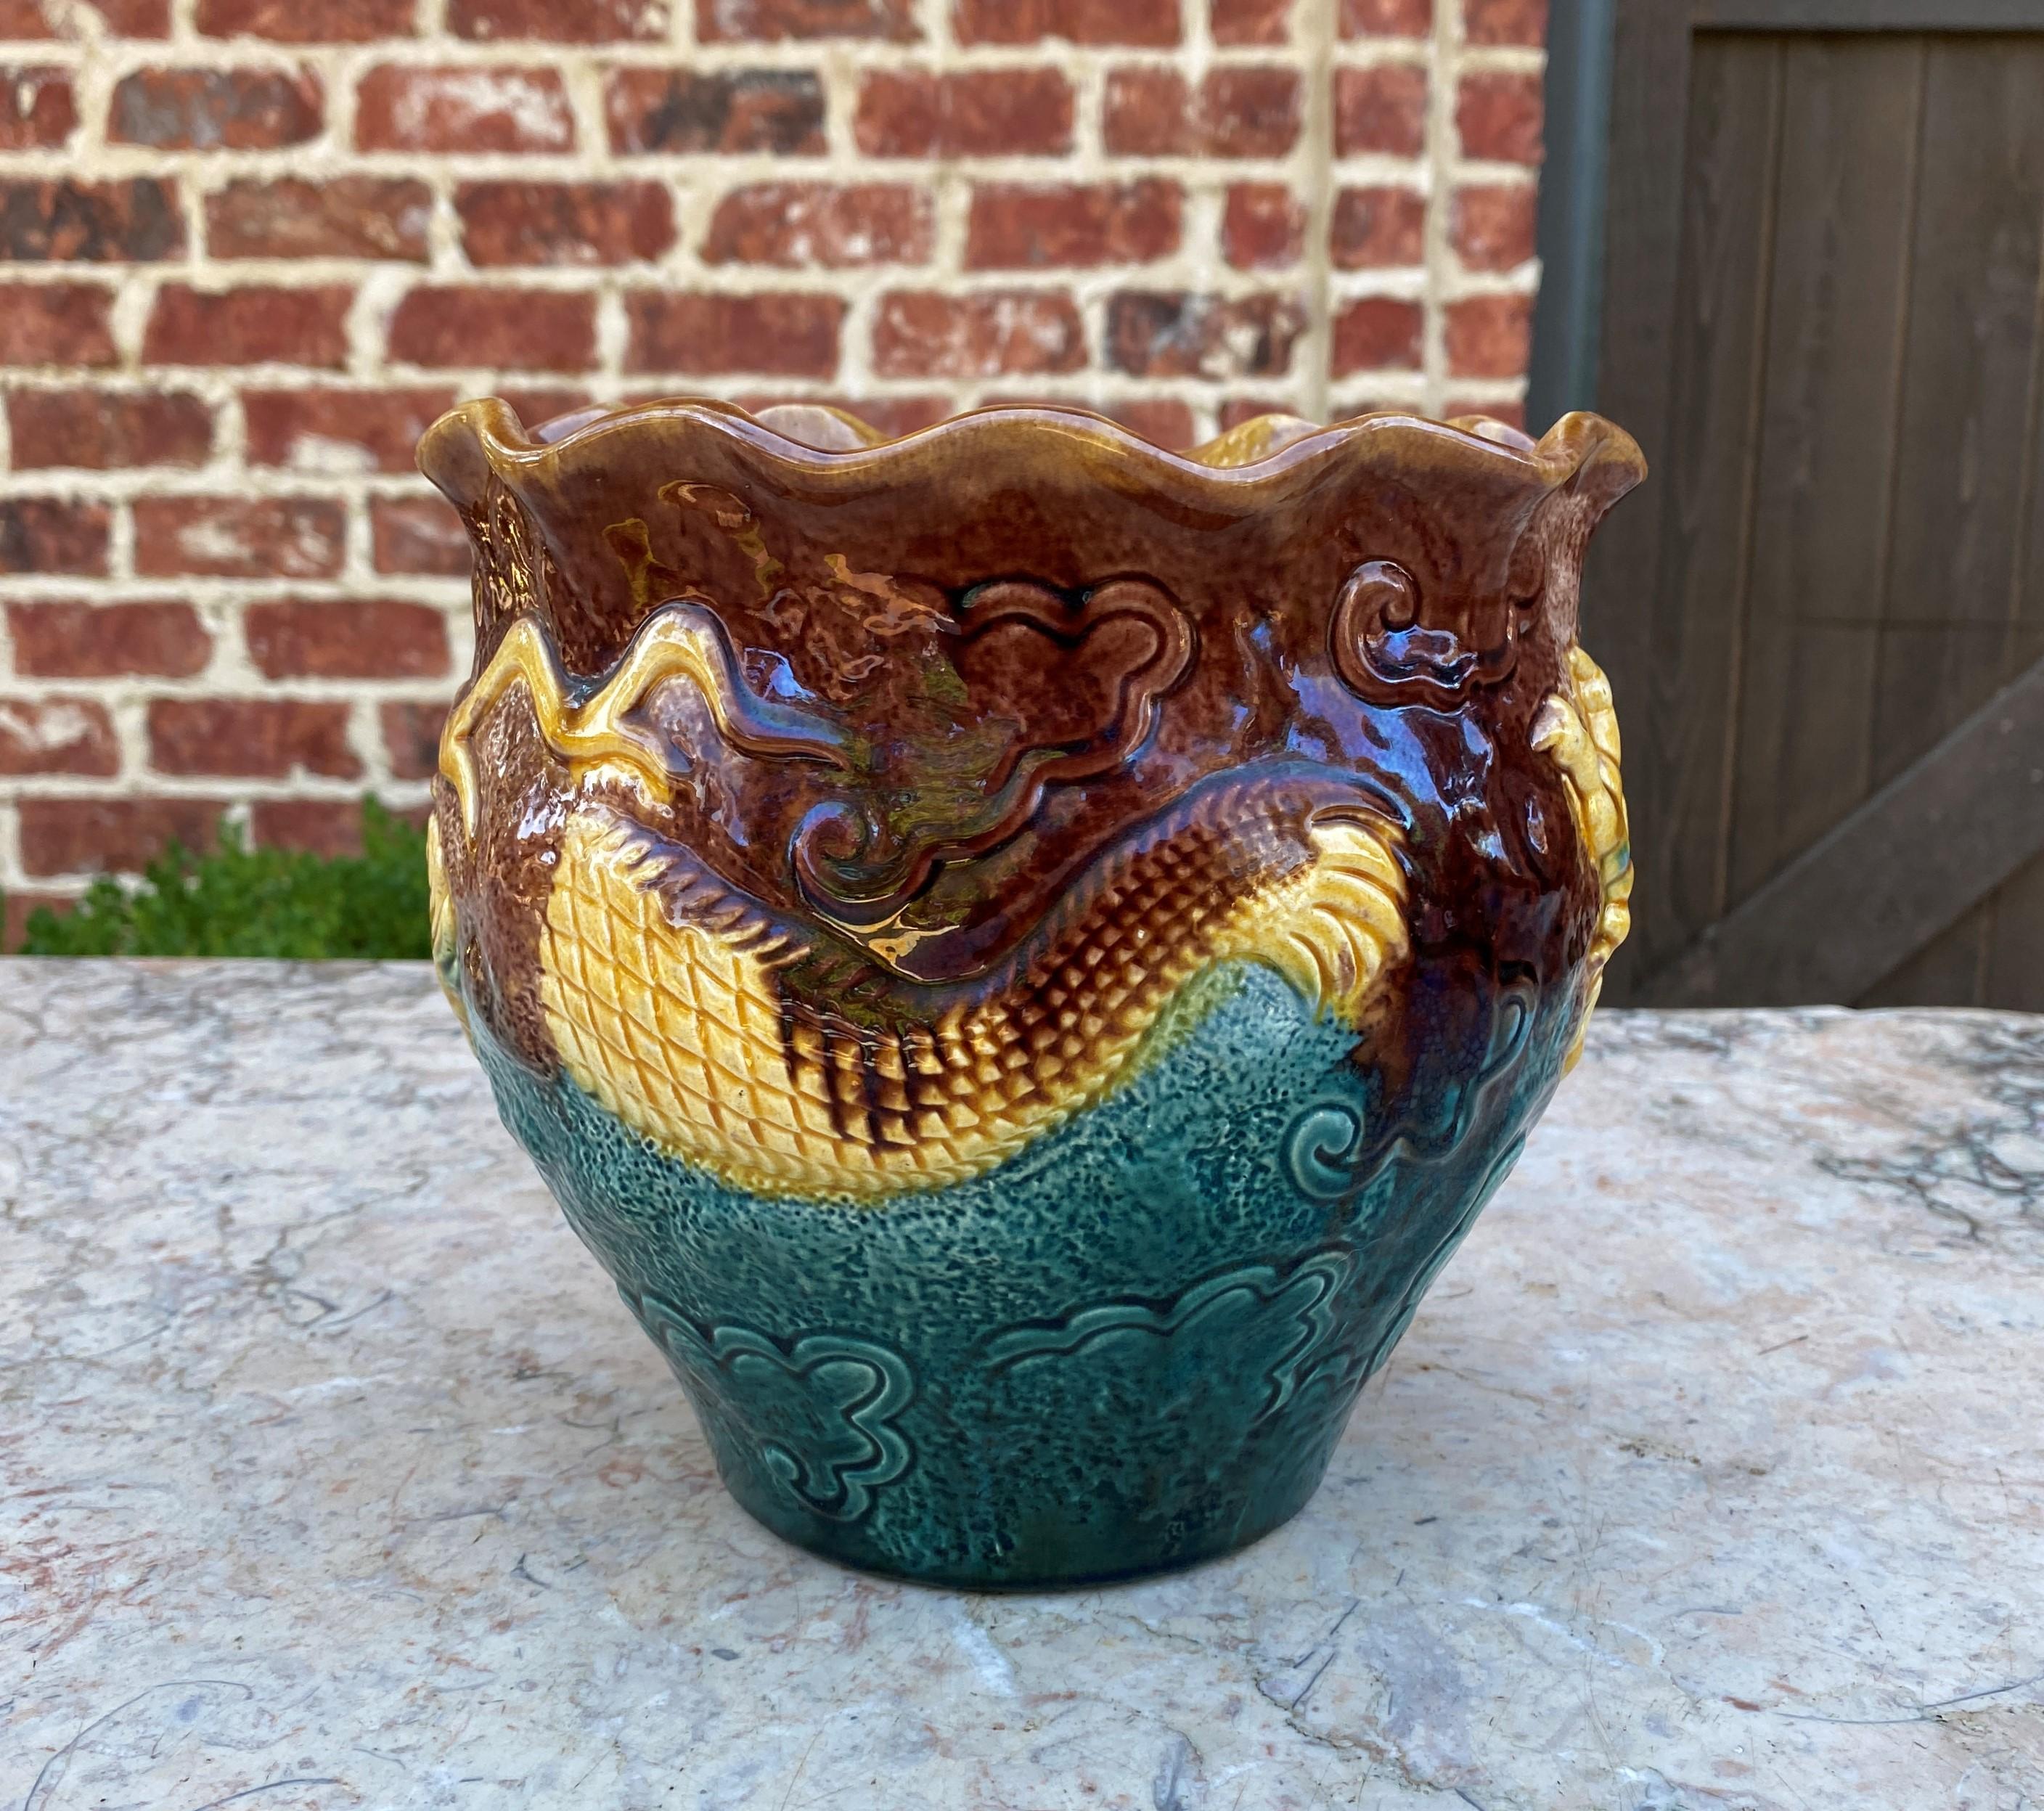 Early 20th Century Antique French Majolica Planter Cache Pot Jardiniere Brown Green Gold Dragons